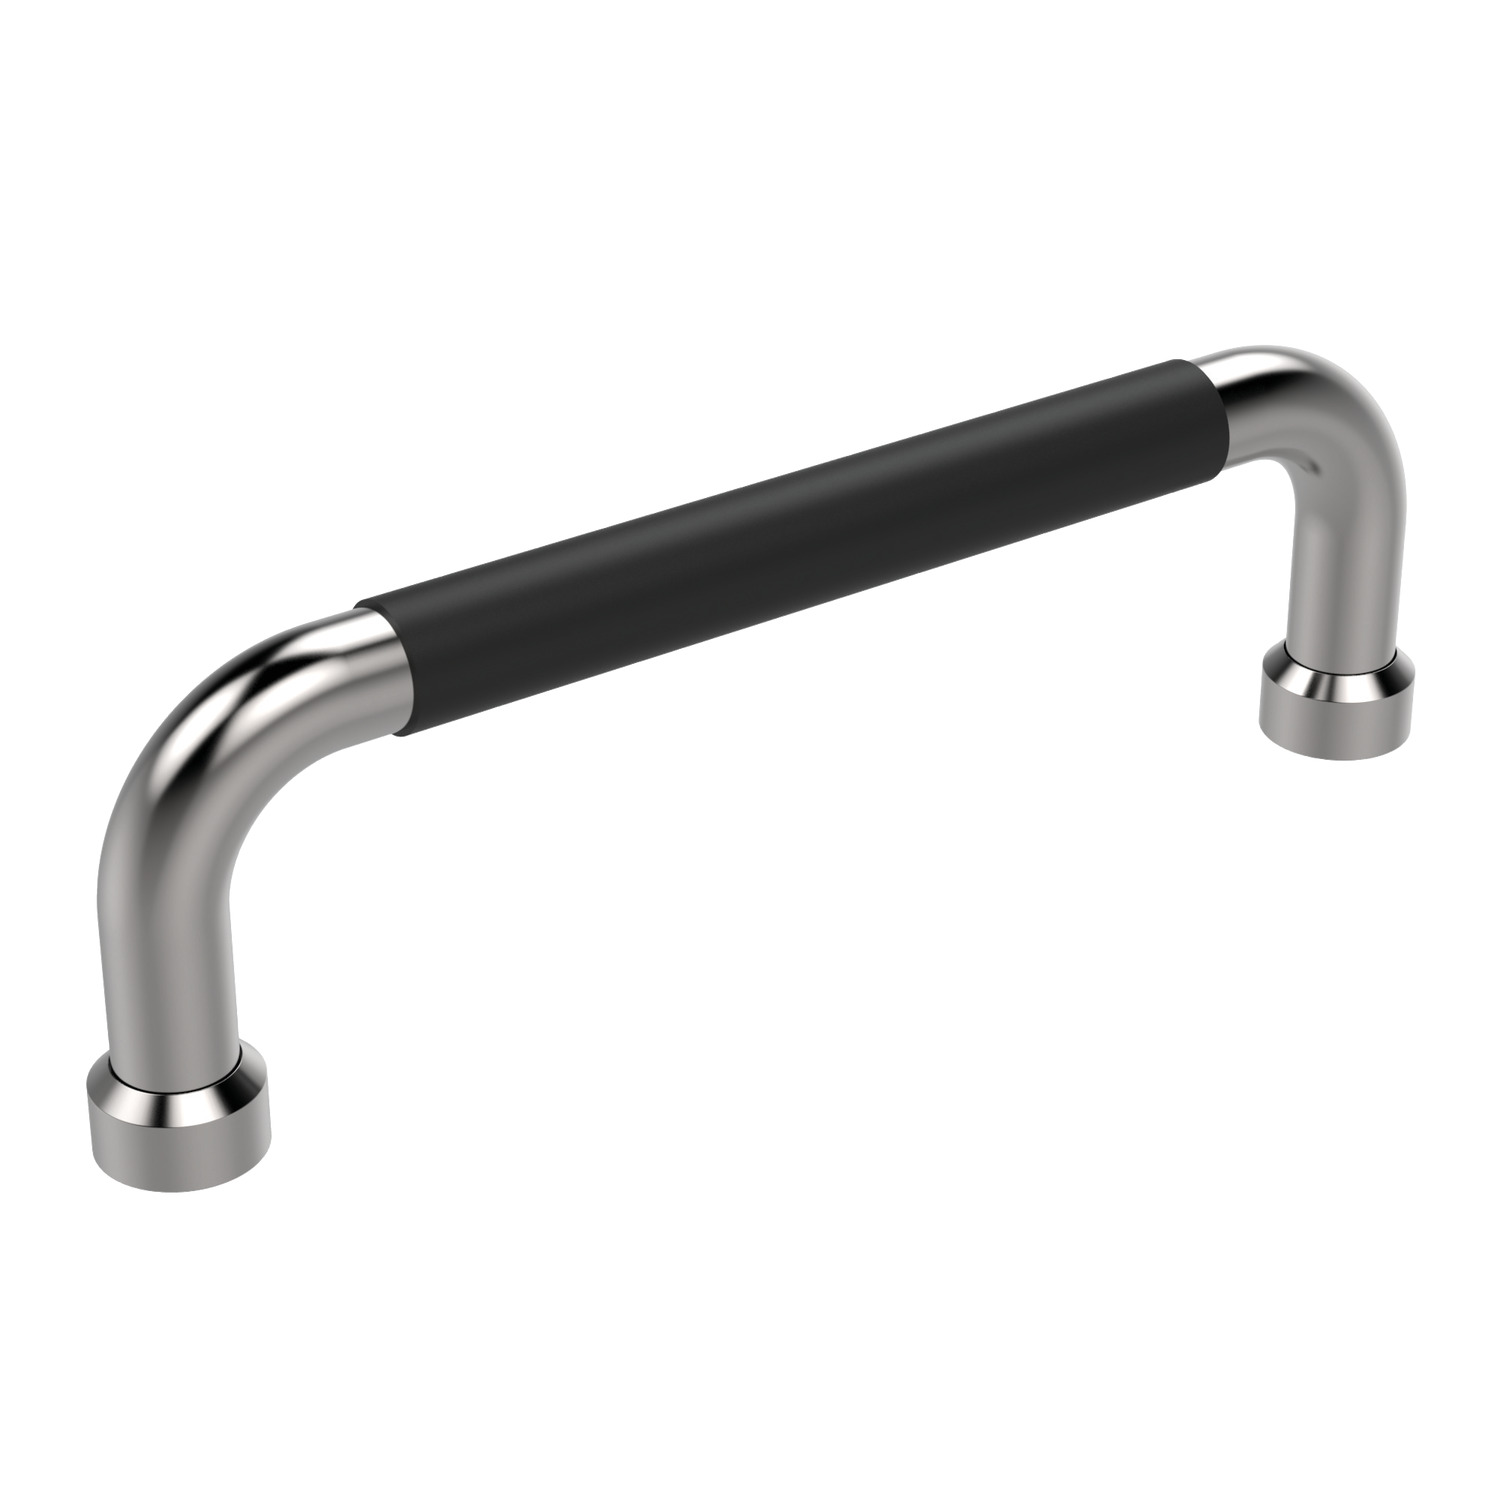 78740 - Pull Handles with Plastic Cover